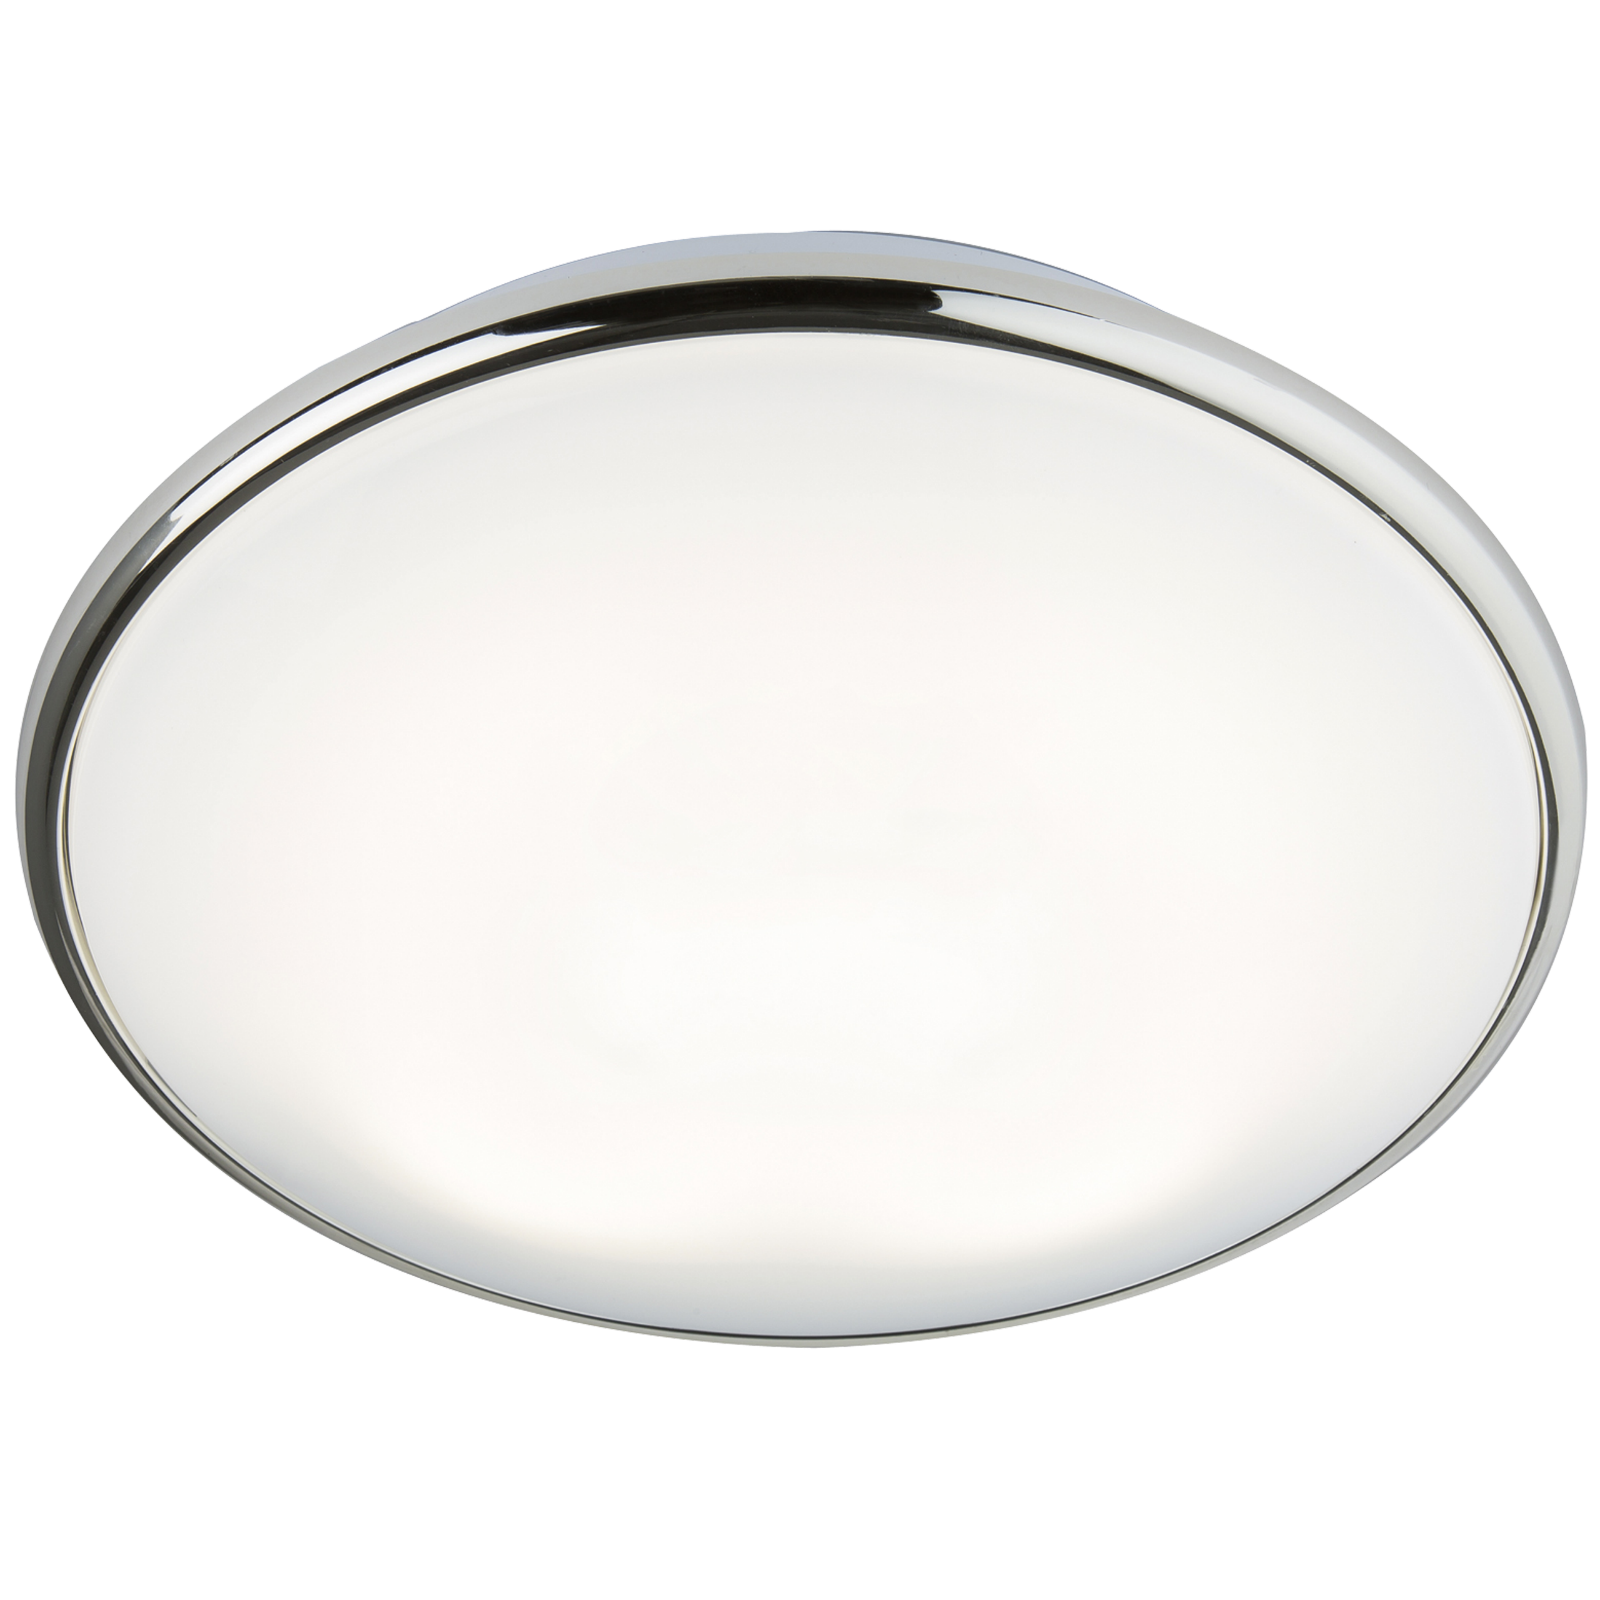 IP20 28W 2D HF Bulkhead With Opal Diffuser And Chrome Base - TP28W2DCHF 